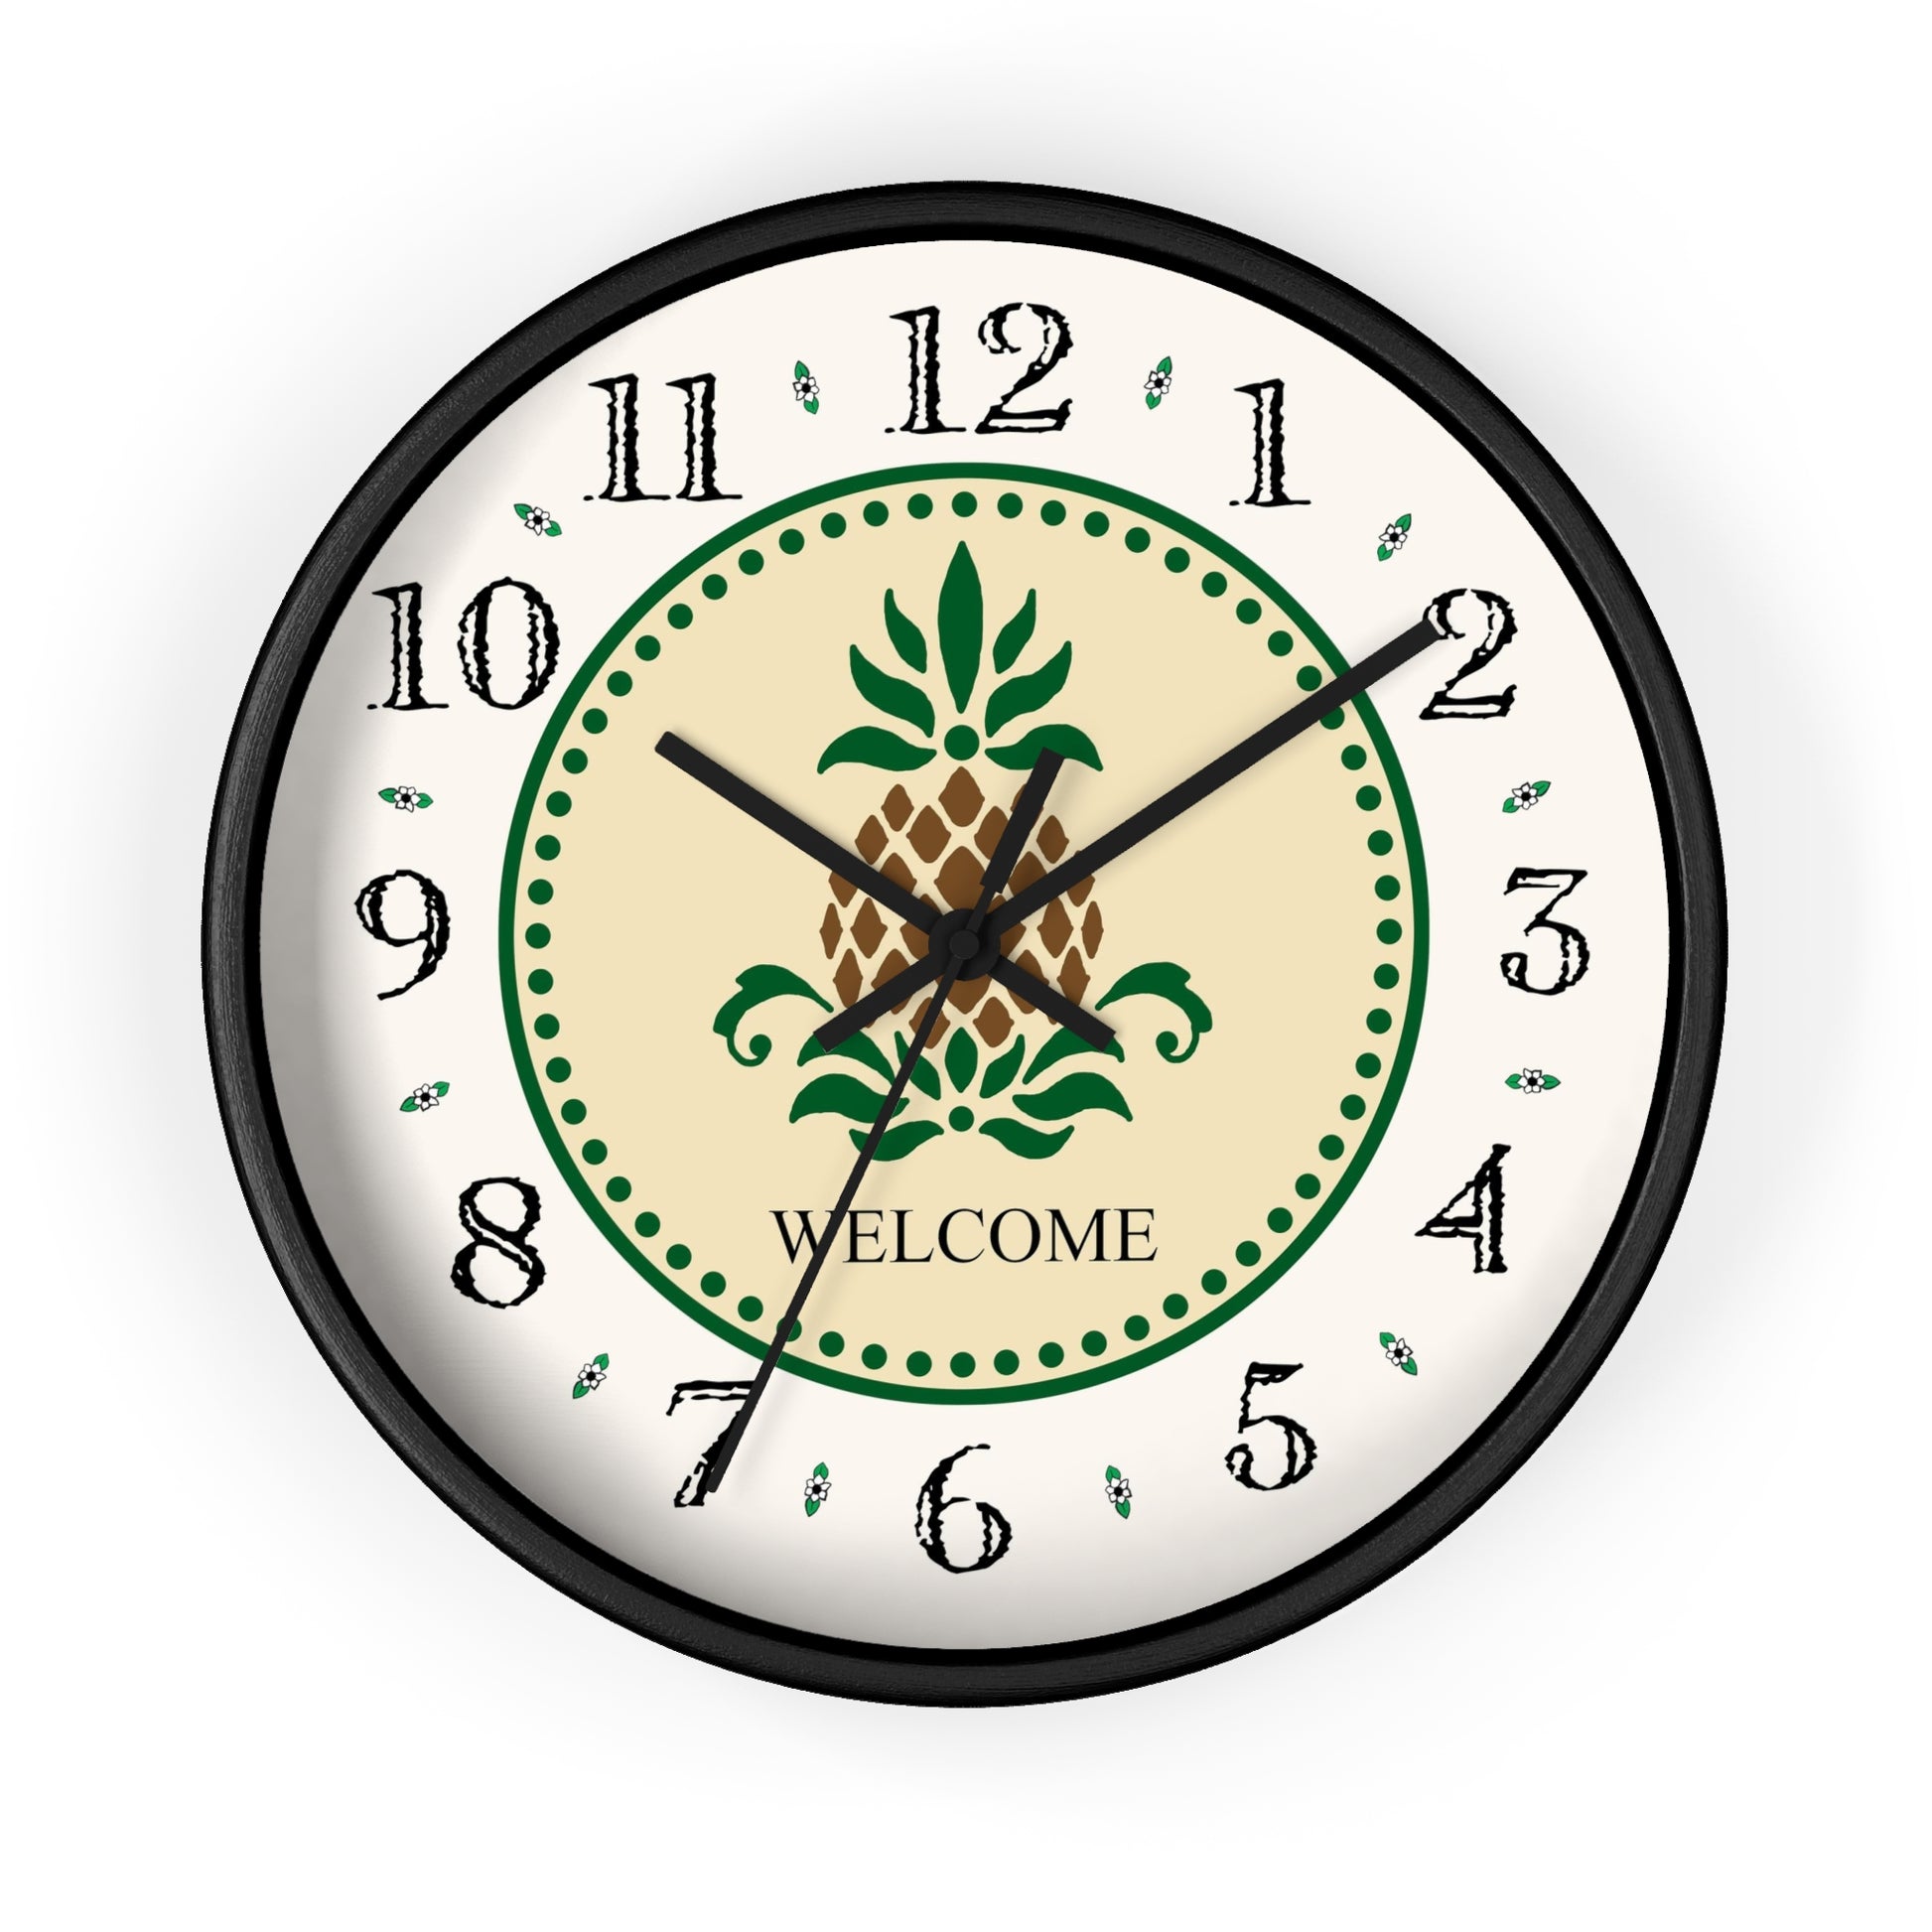 The Welcome Folk Art Design Heirloom Designer Collection Wall Clock features a pineapple and the word "Welcome". The pineapple has long been a symbol of welcome and hospitality. Place this stunning Folk Art Design clock on your wall and say "Welcome!" to all who visit and enjoy your special hospitality.     The clock image is a reproduction of an original watercolor by Lee M. Buchanan., with  hand-drawn images between the numbers.